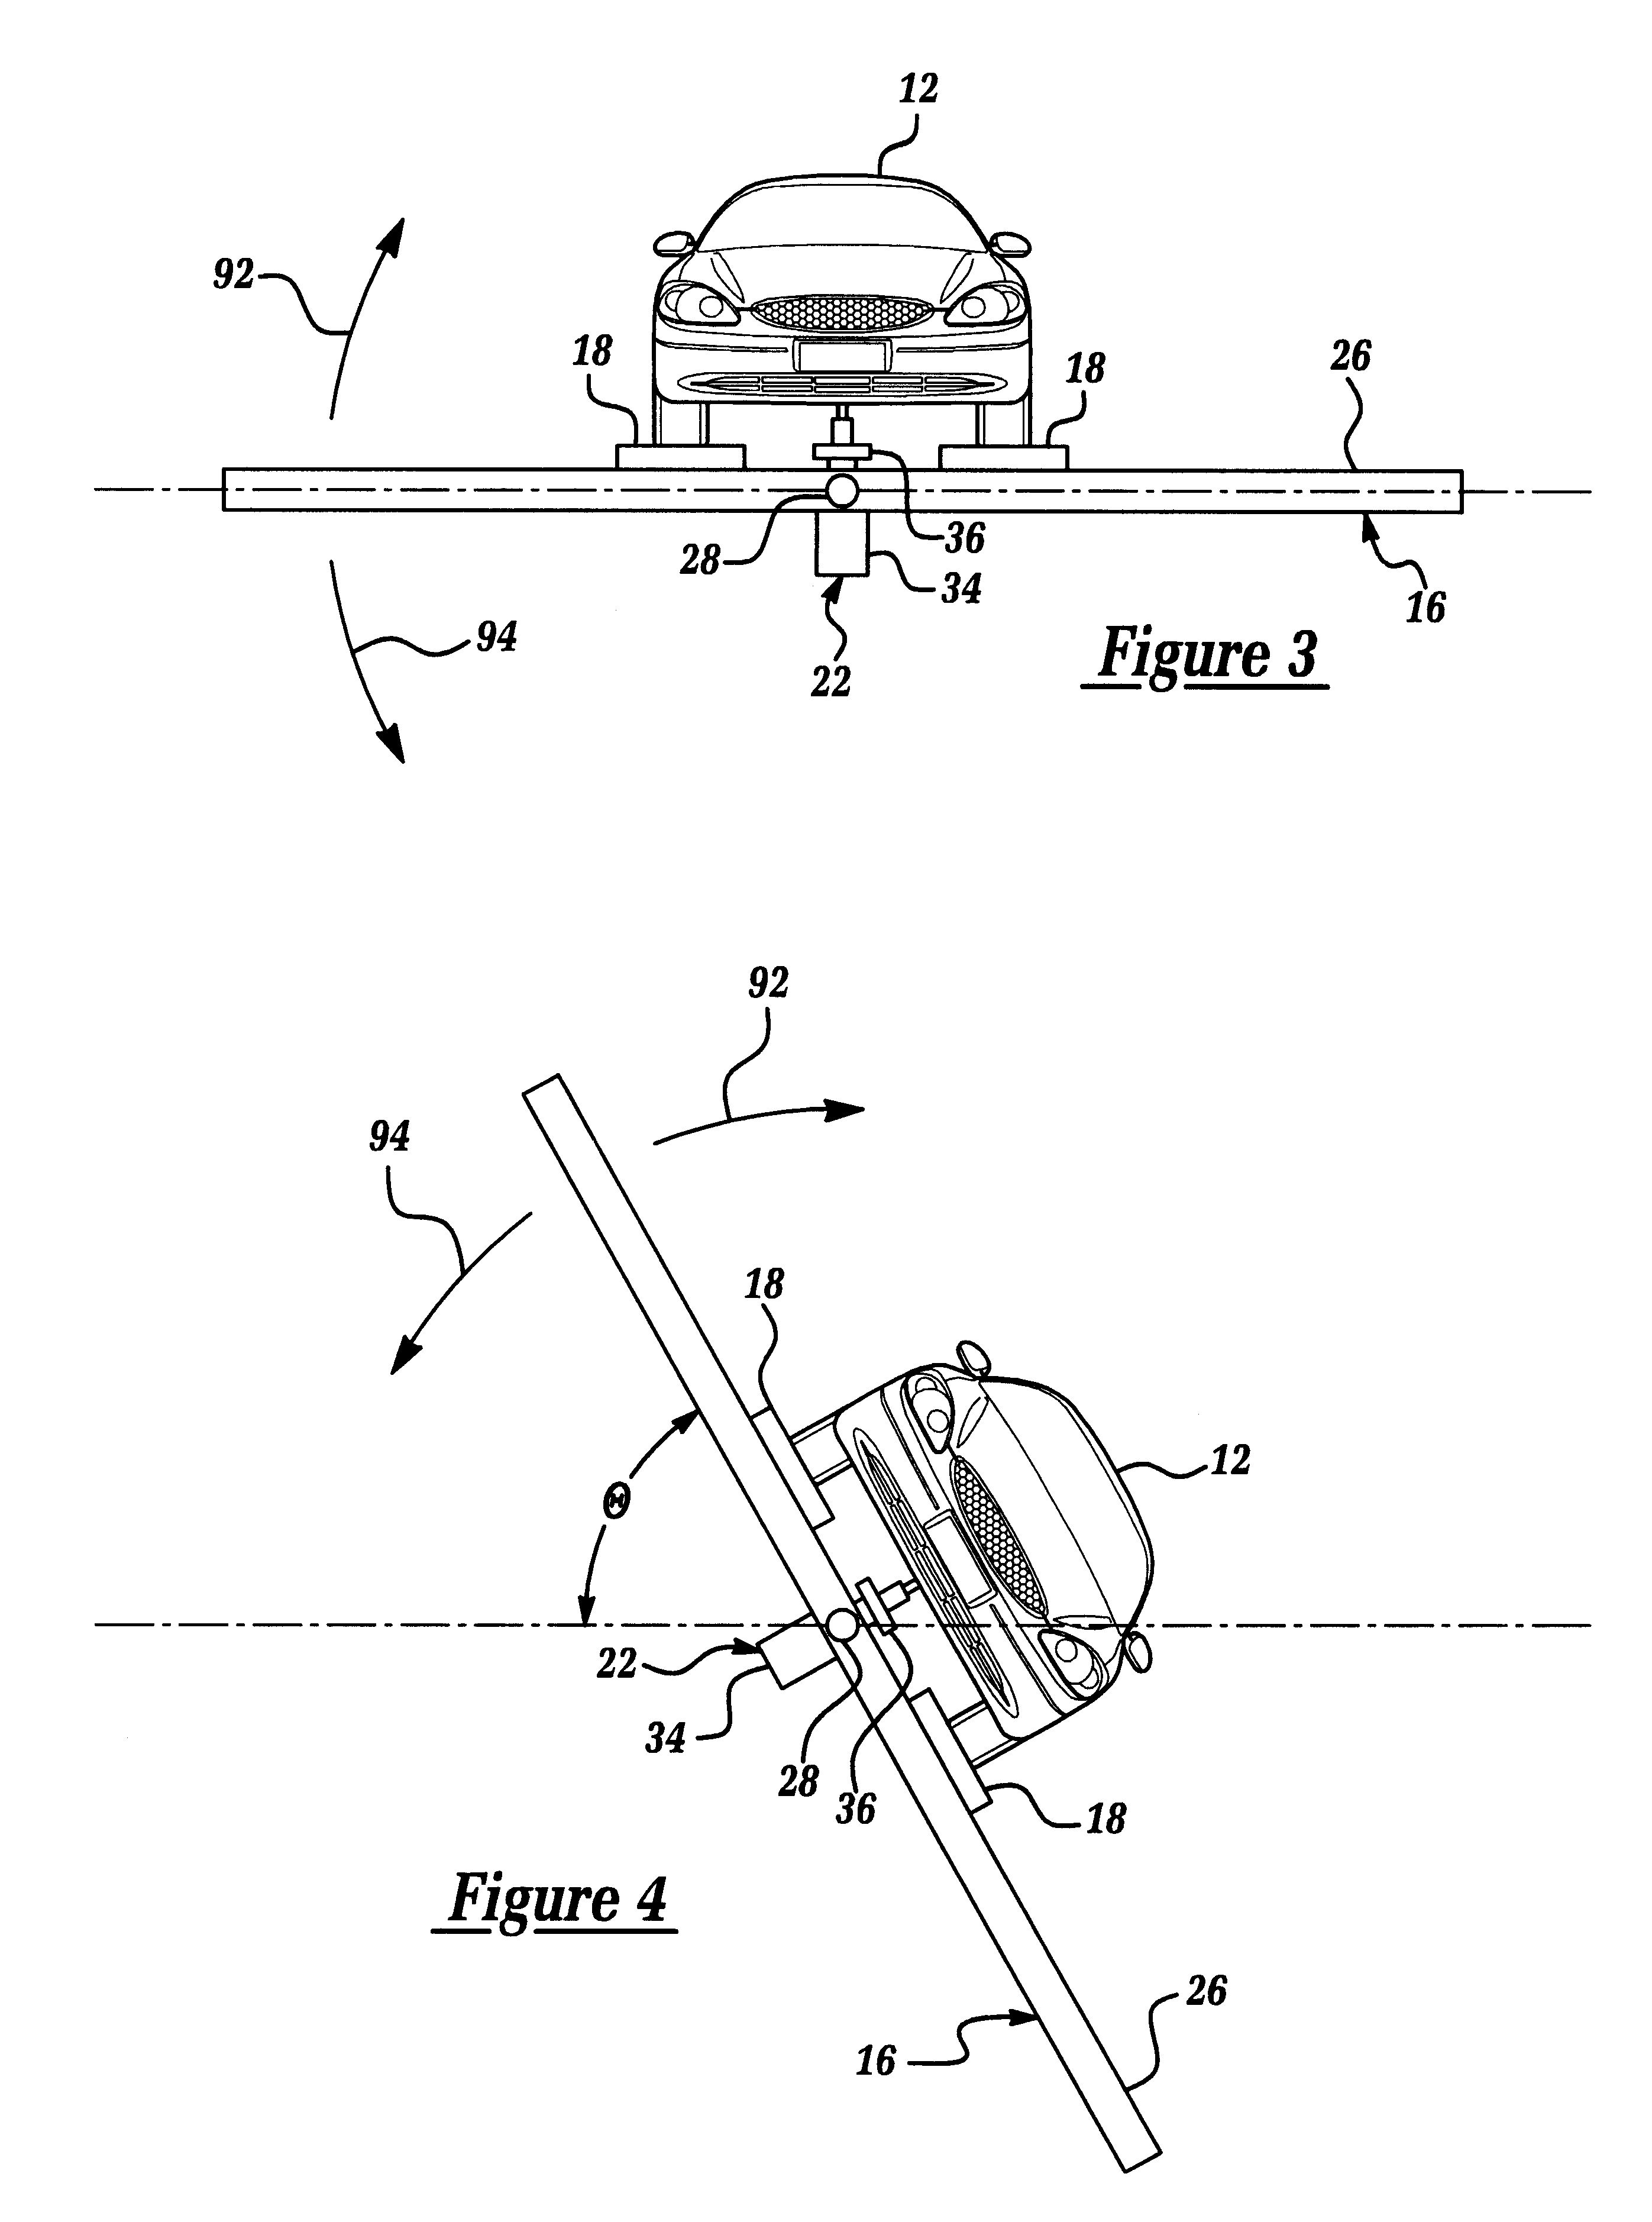 Method and apparatus for measuring the rollover resistance and compliance characteristics of a vehicle